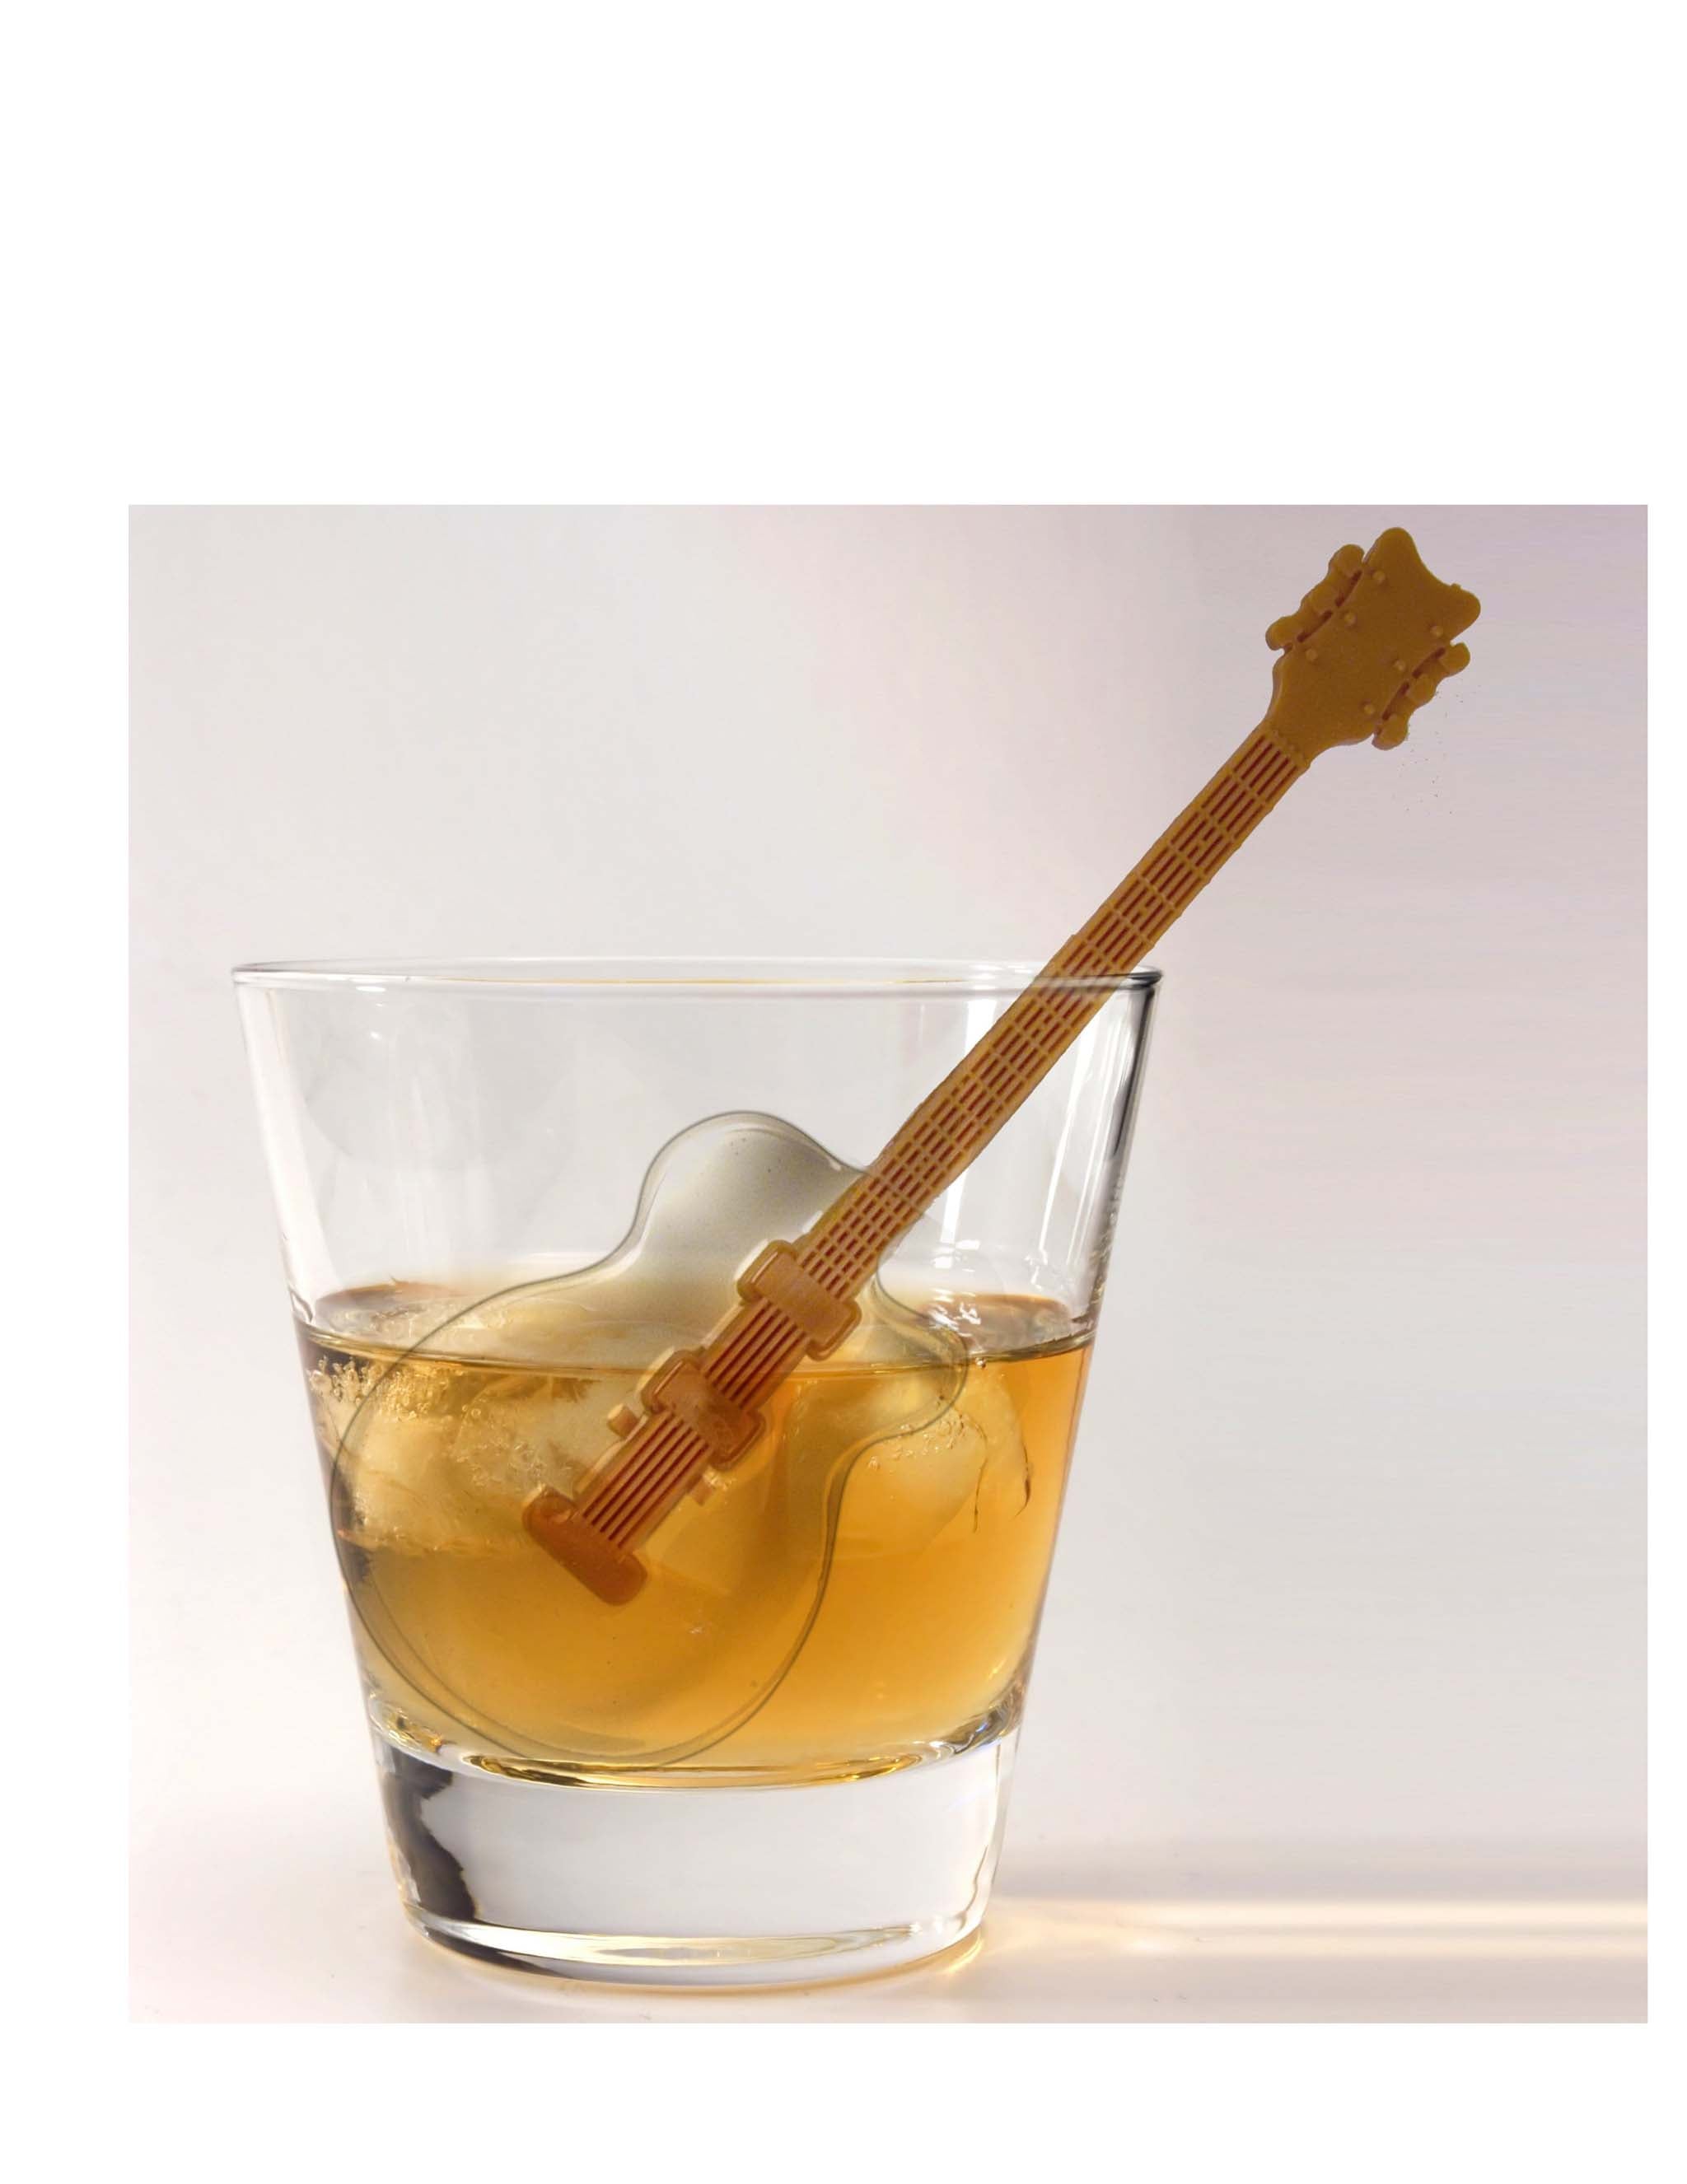 Fred's Guitar Ice Stirrers